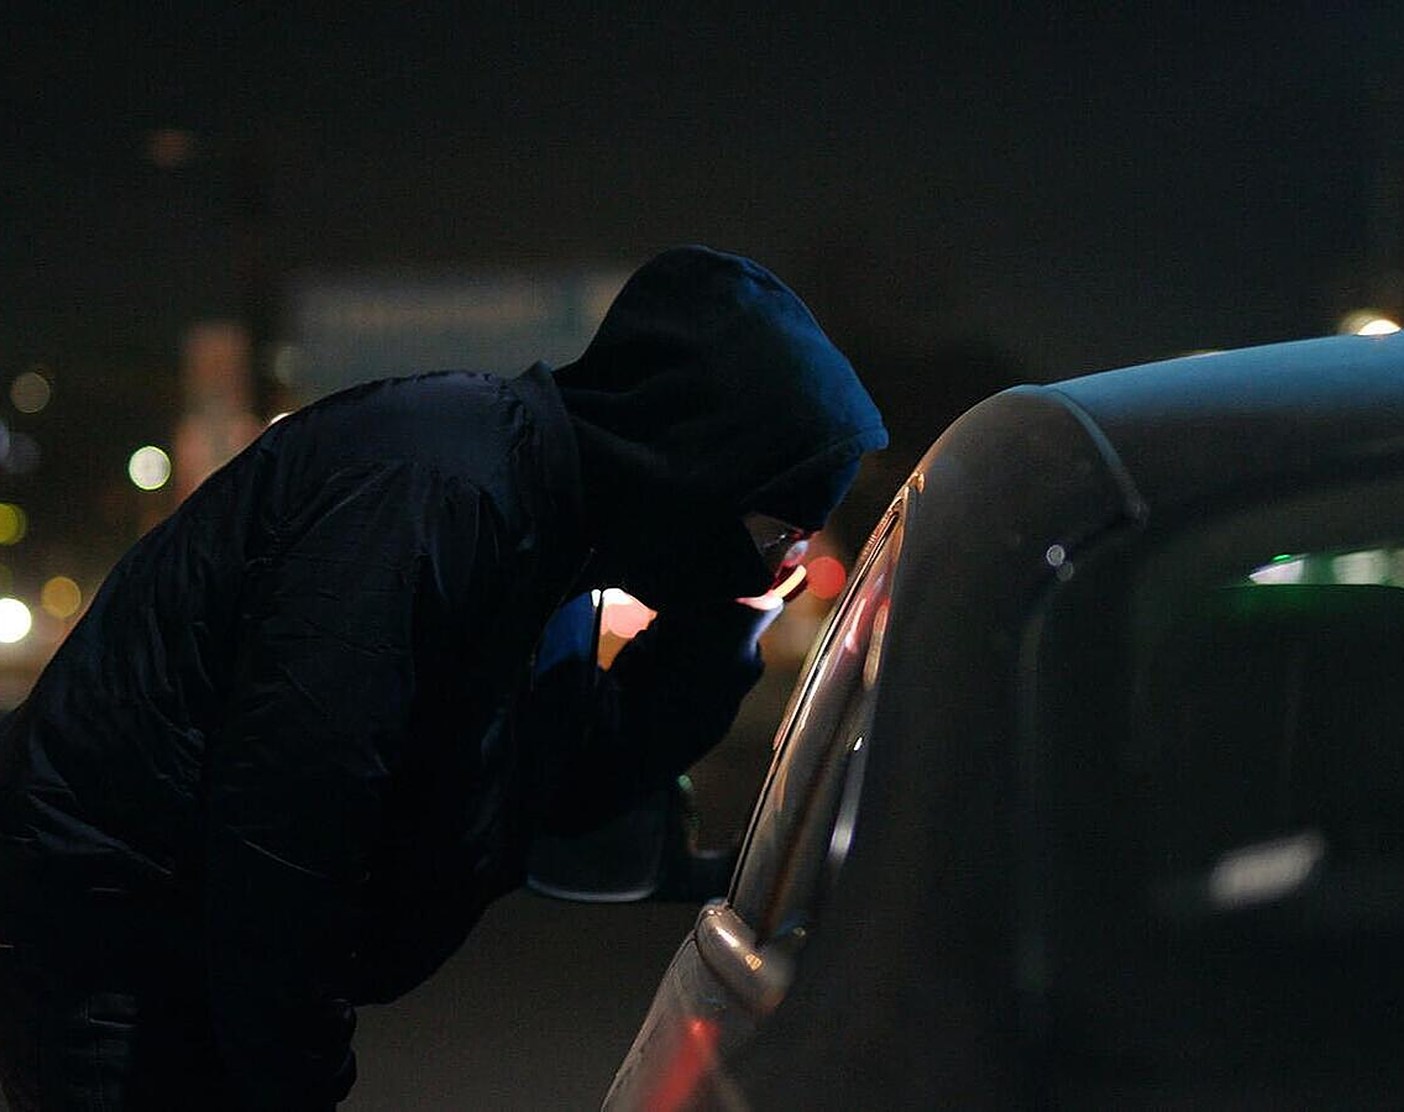 Vehicle Thefts Hit One Million For First Time Since 2008